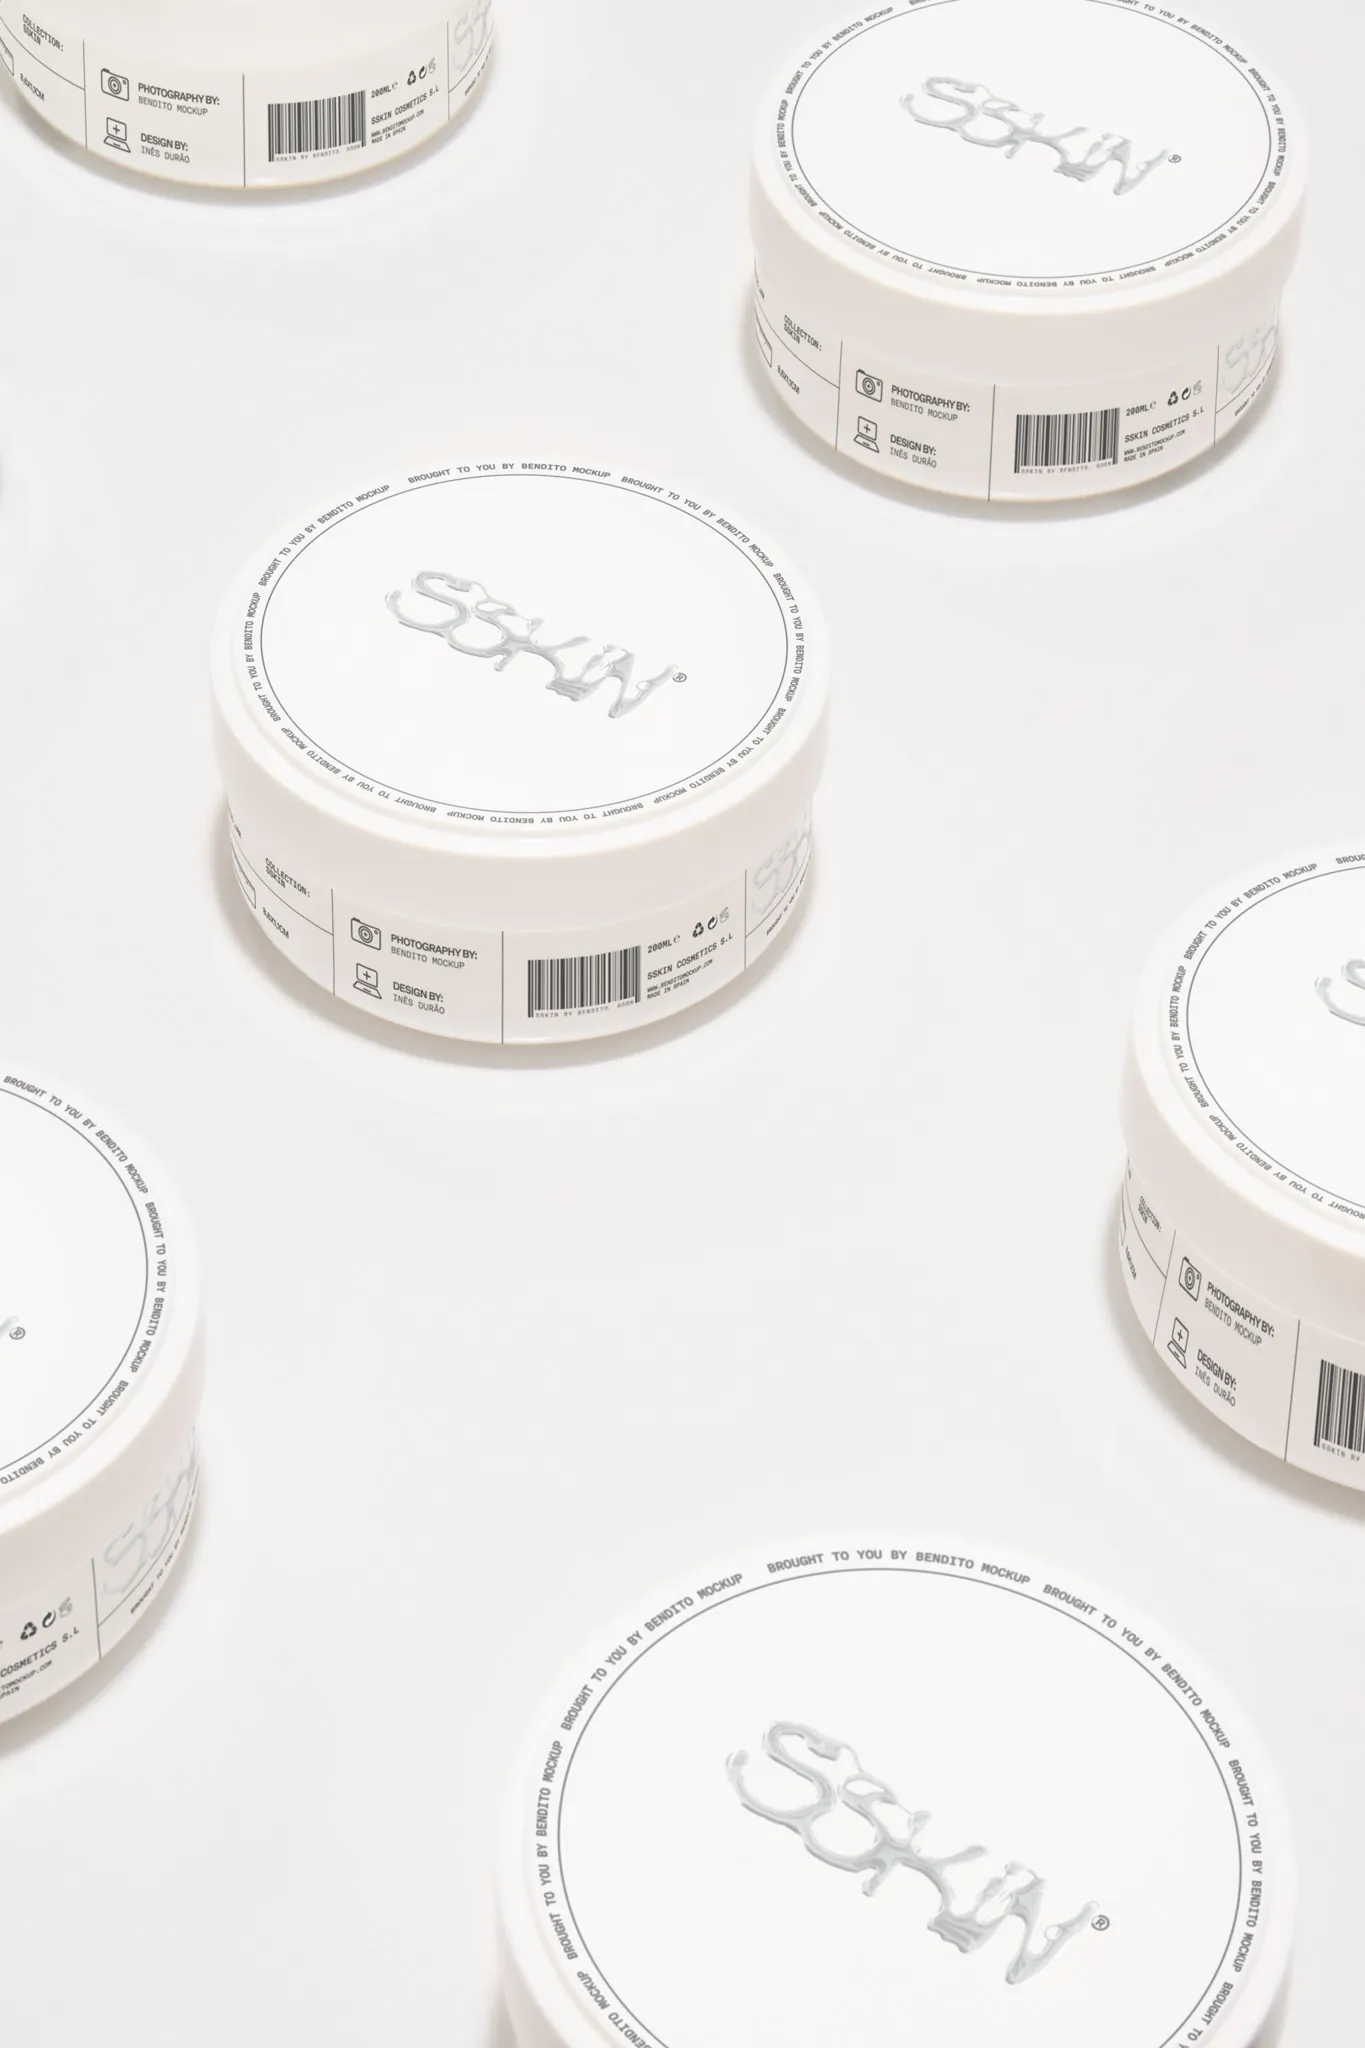 Cosmetic jars mockup on a white surface. Cream Jar mockup. Packaging PSD file. Skin care PSD file. Skin care mockup. High-quality packaging mockup.